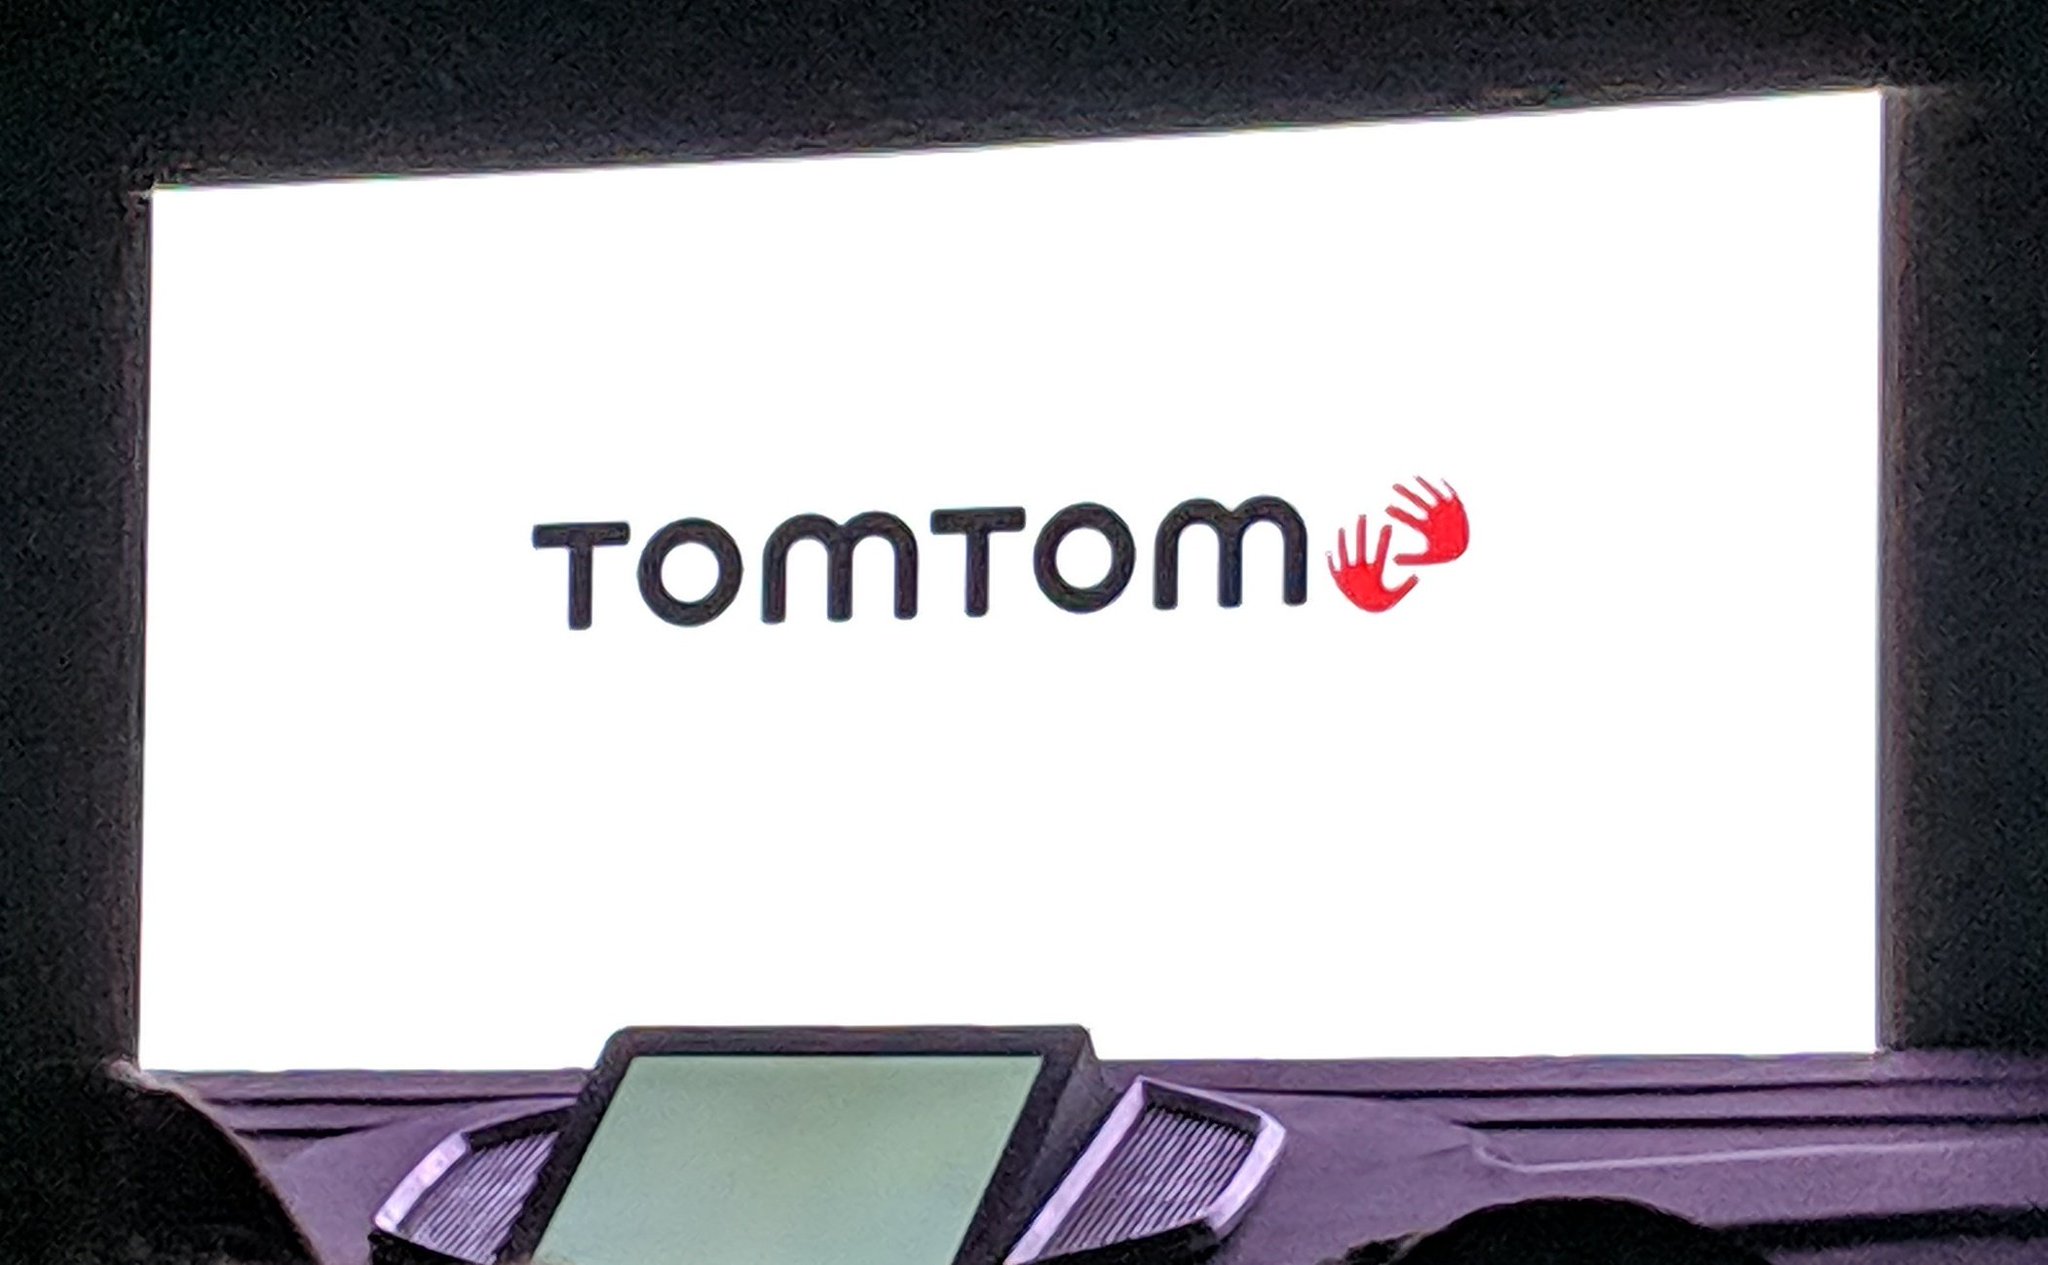 <p>TomTom has partnered with MG India to create IQ Maps, which promises to provide the most up-to-date navigation service &amp; intelligently downloads map areas relevant to the owner compete with love traffic info and points of interest.</p>